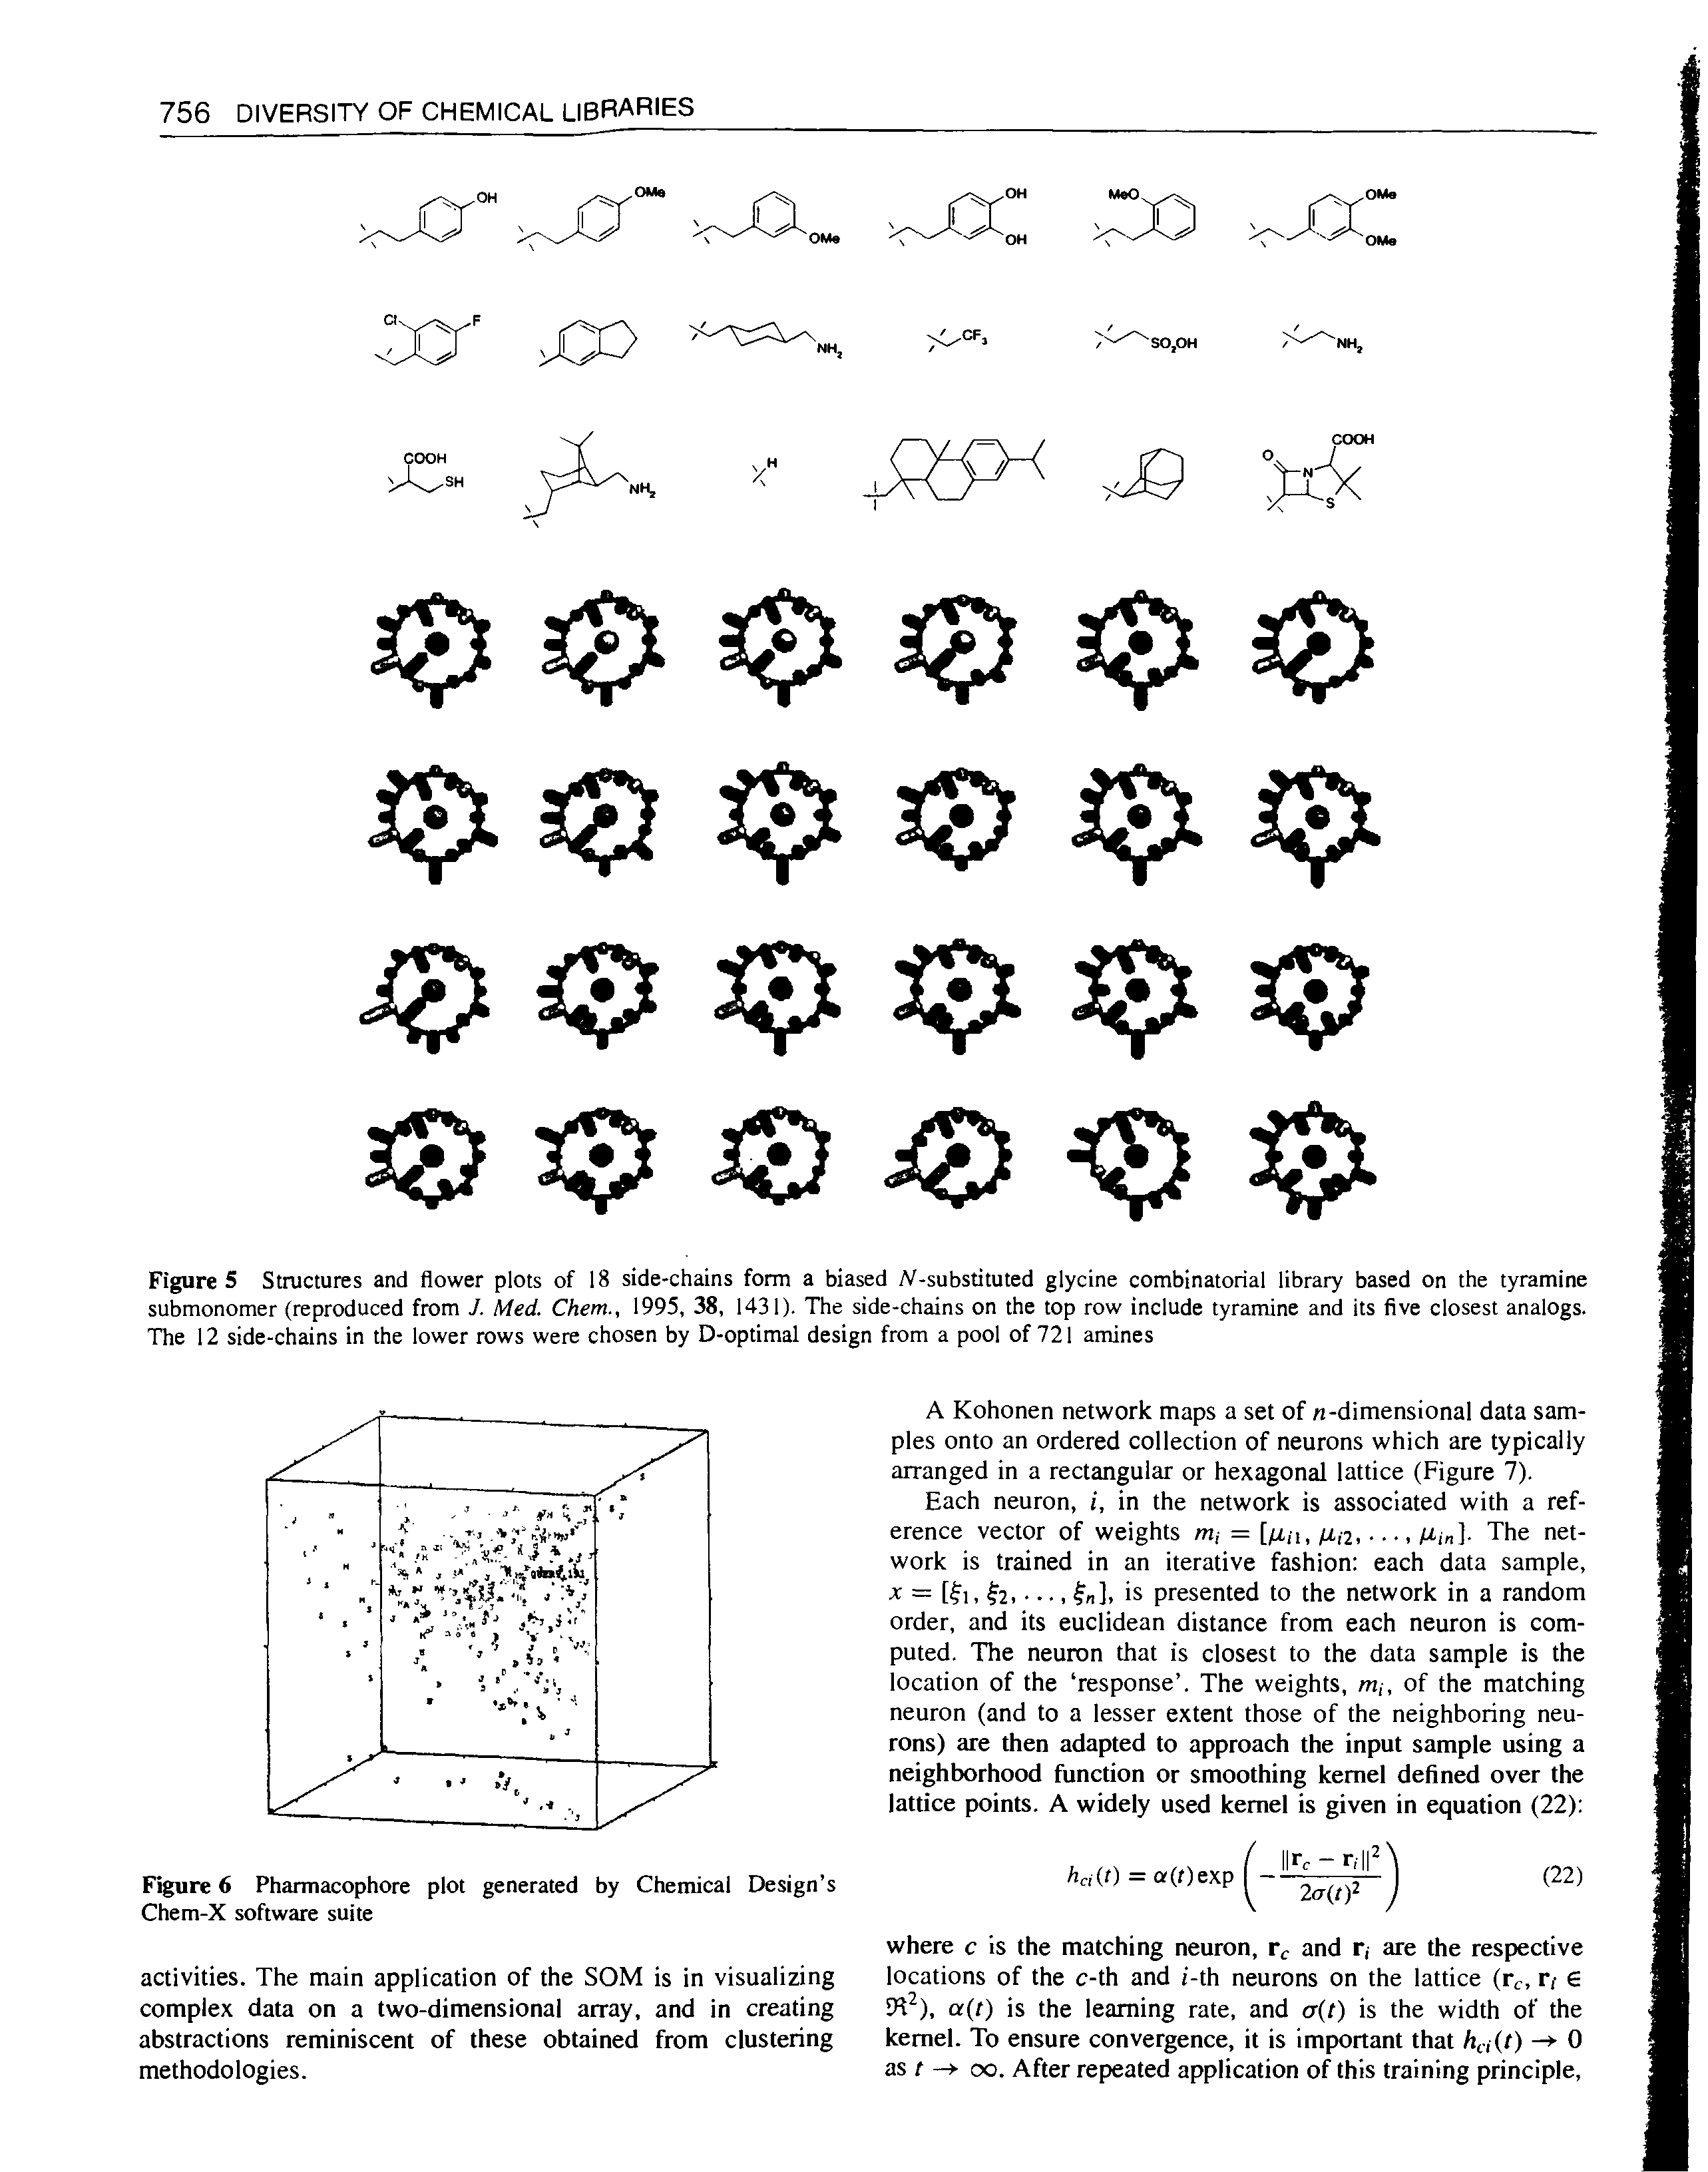 Figures Structures and flower plots of 18 side-chains form a biased -substituted glycine combinatorial library based on the tyramine submonomer (reproduced from J. Med. Chem., 1995, 38, 1431). The side-chains on the top row include tyramine and its five closest analogs. The 12 side-chains in the lower rows were chosen by D-optimal design from a pool of 721 amines...